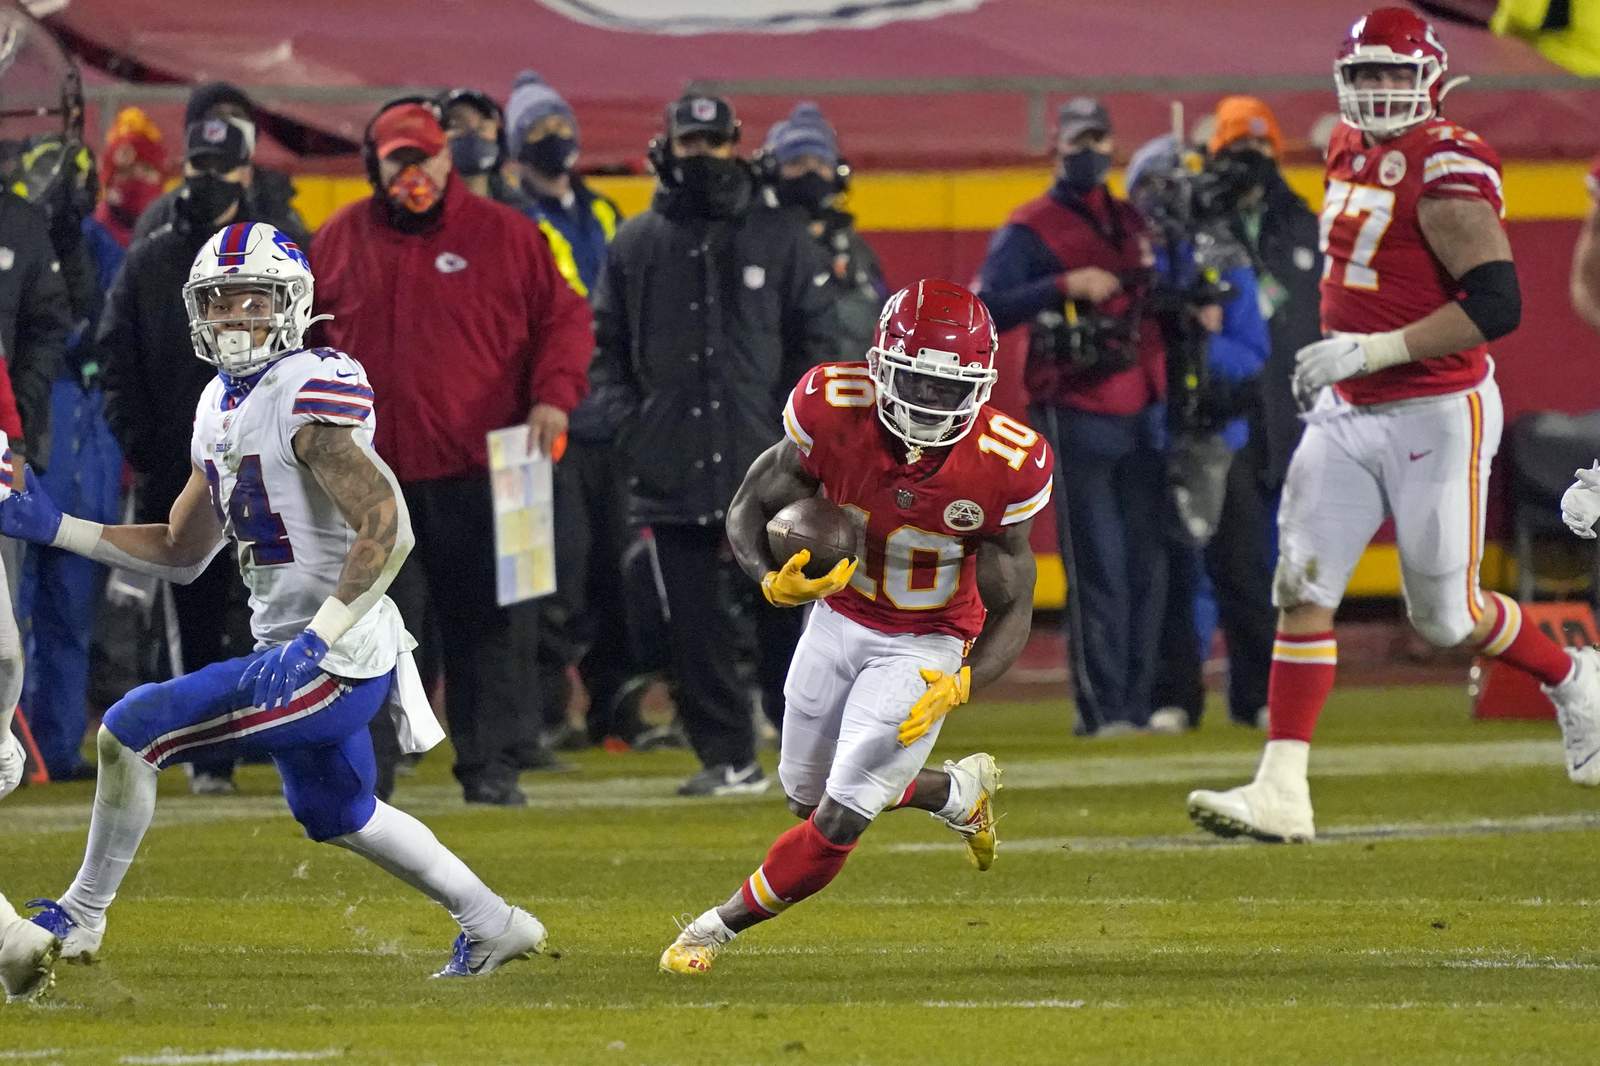 After shaky start, Chiefs' Hill matures into All-Pro star